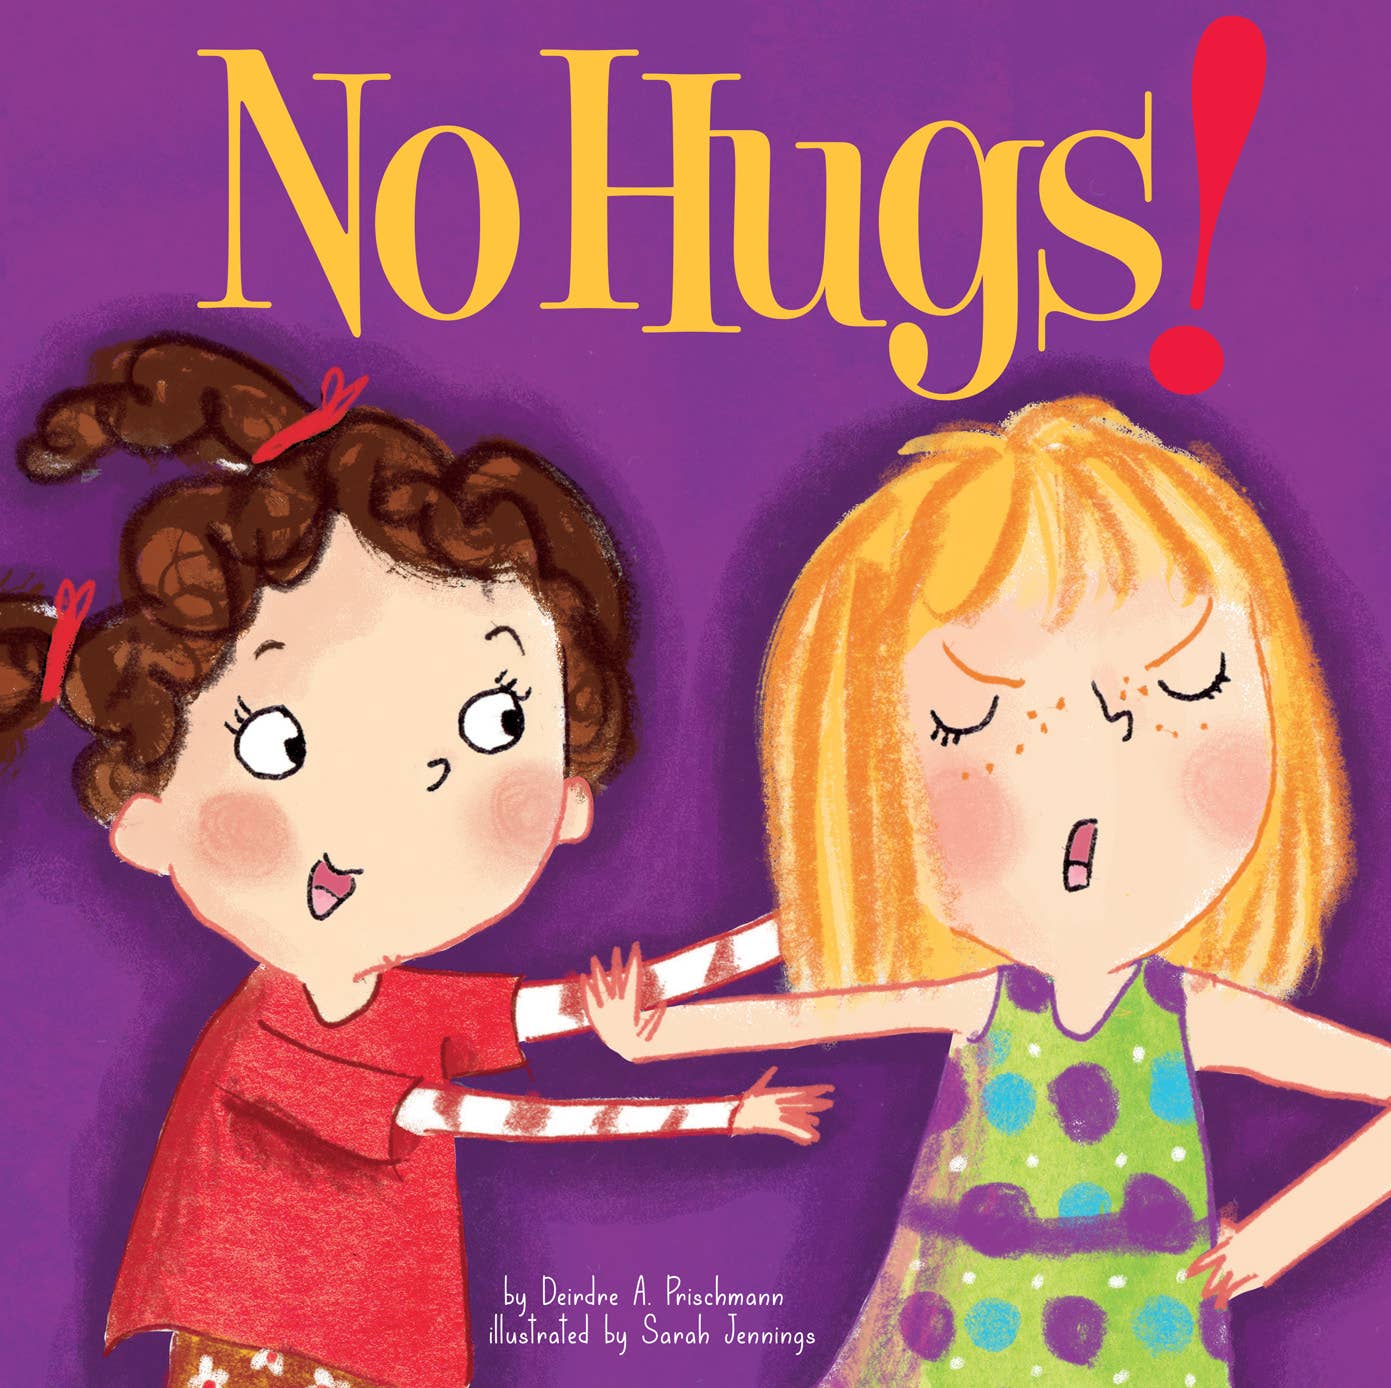 A book cover with an illustration of two children with light skin tone. One has brown pigtails and is smiling while extending both of their hands towards the other child. The other child is extending a hand to keep them at a distance, with their other hand is on their hip. They have shoulder length blonde hair and their eyes are closed.